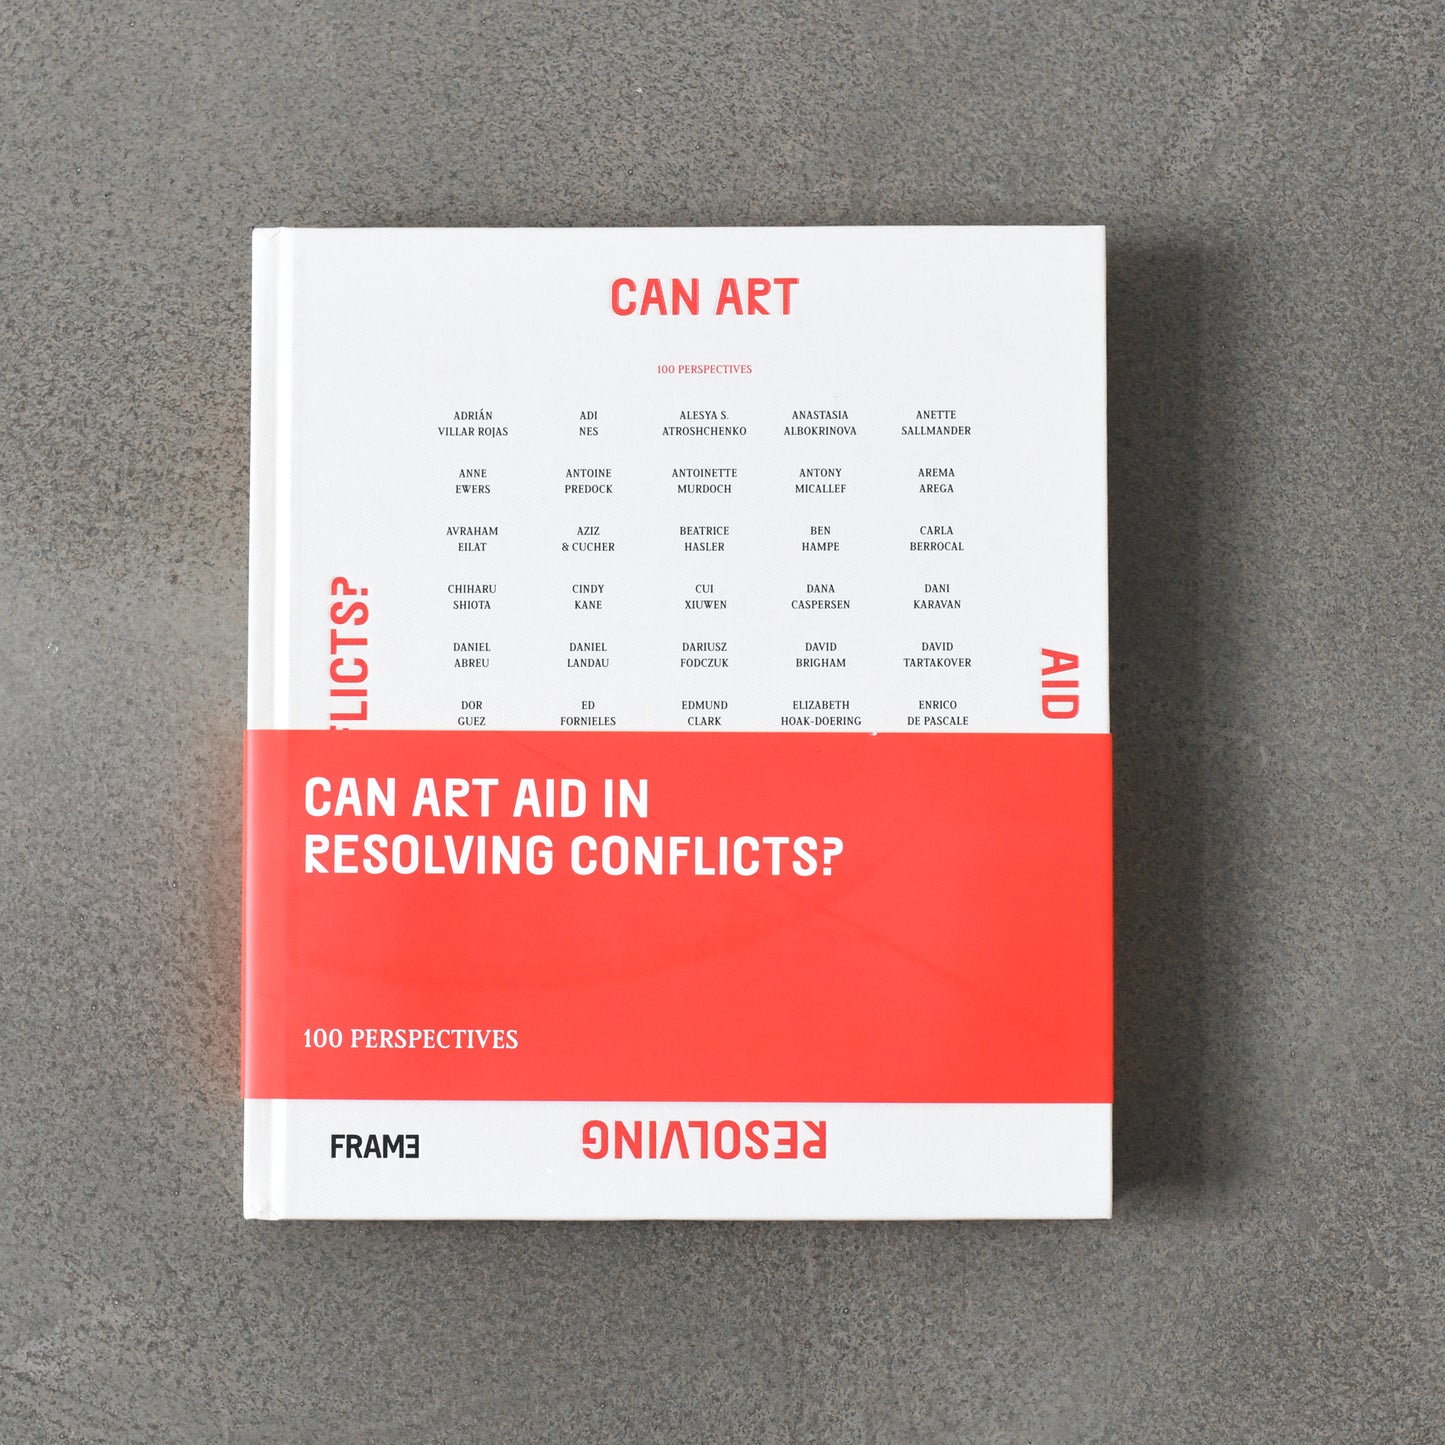 Can Art Aid and Resolving Conflicts. 100 Perspectives